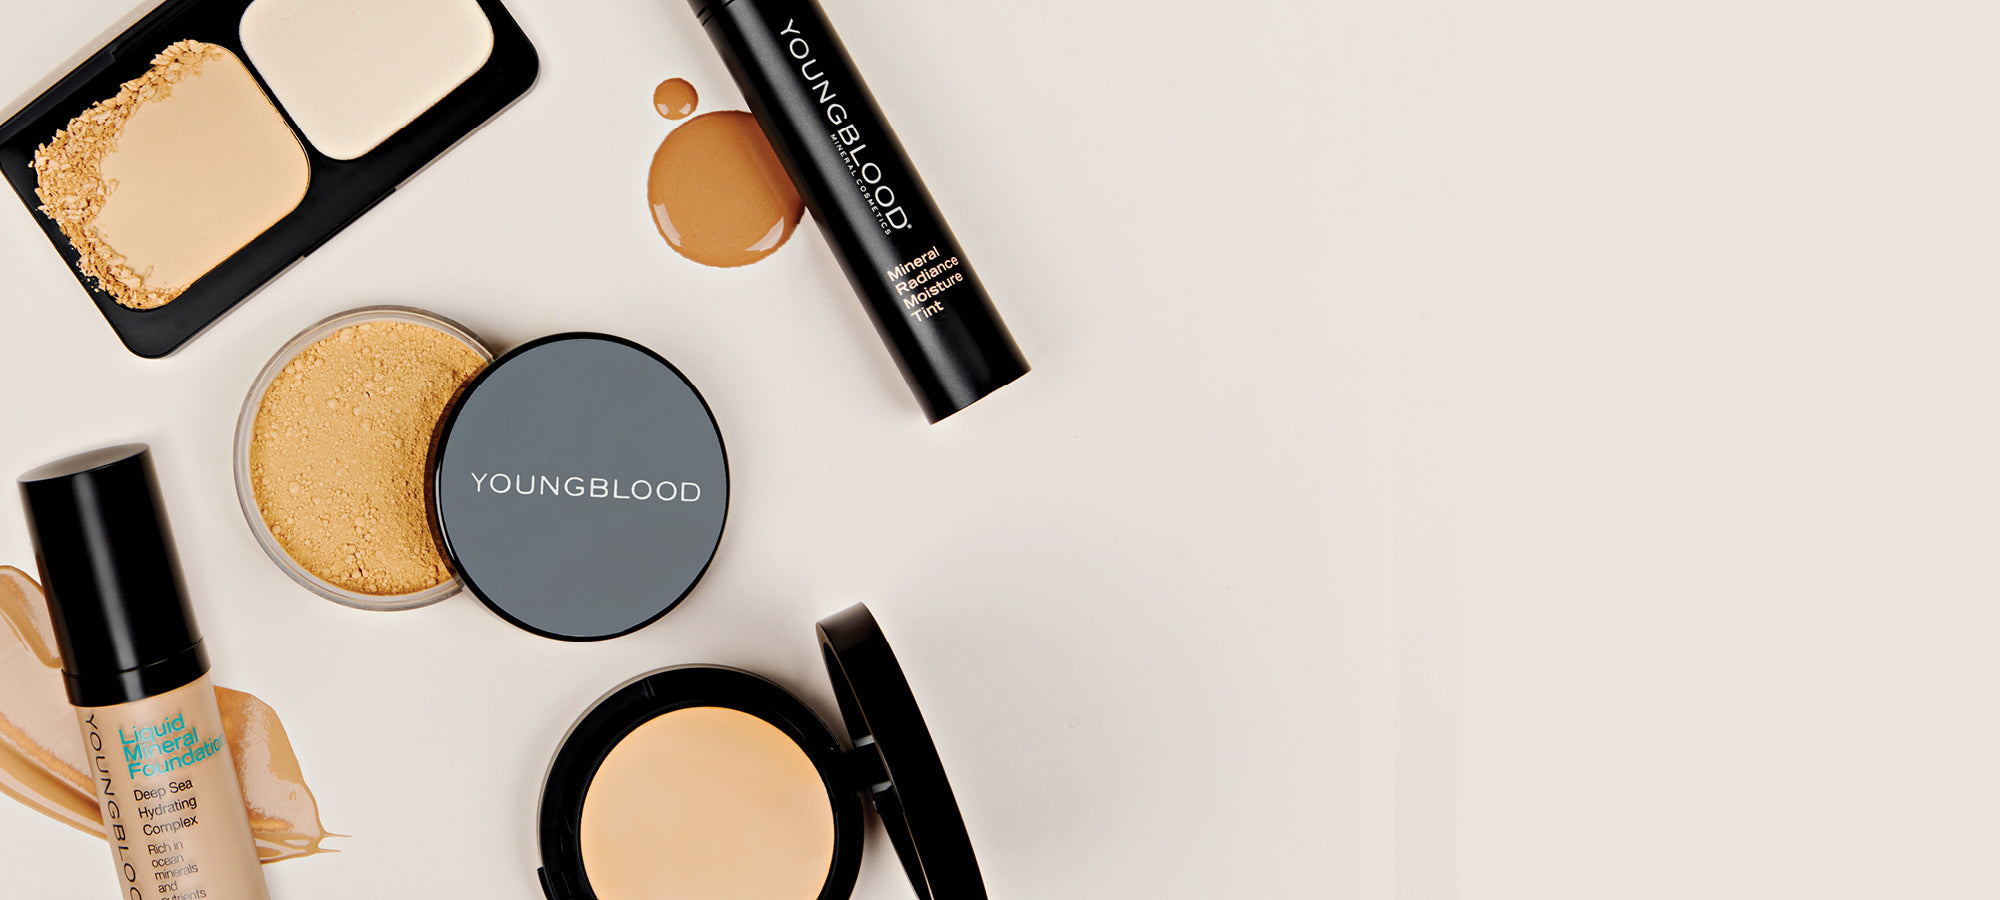 Foundation Youngblood Mineral Cosmetics